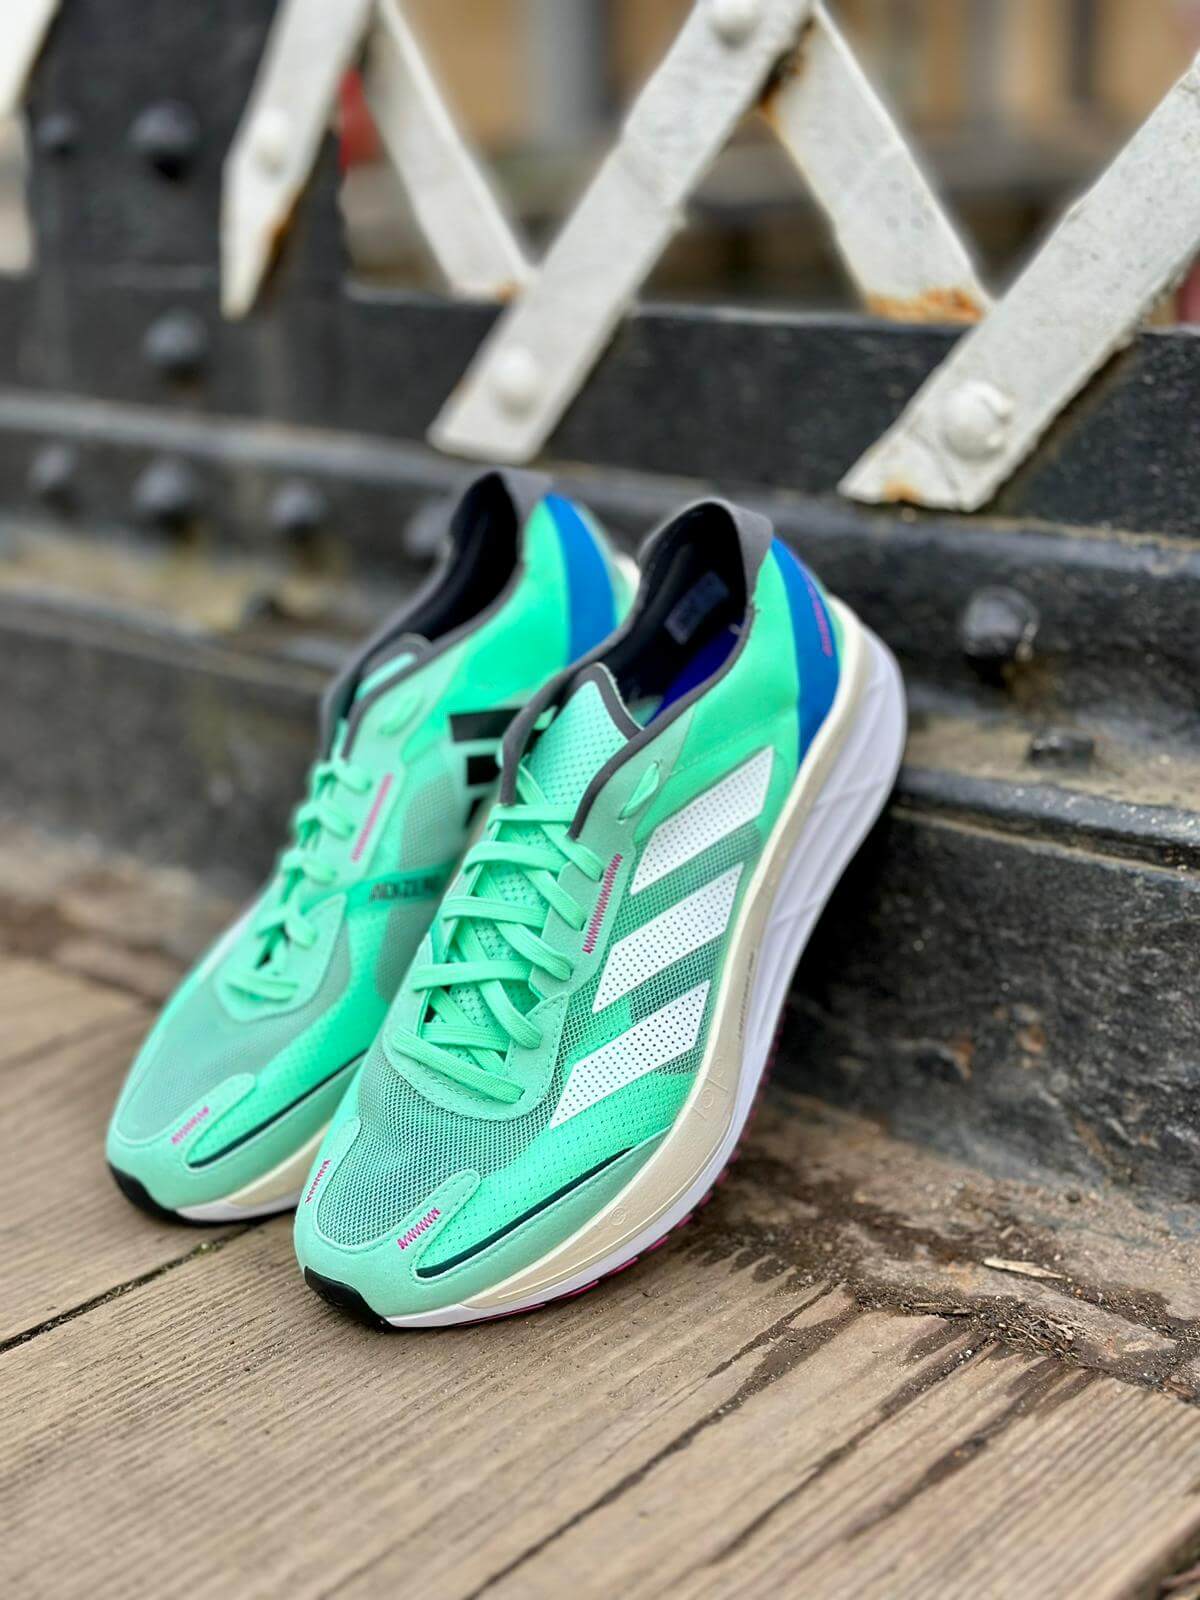 Pair of adidas Adizero Boston 11 running shoes in Pulse Mint colourway propped on bridge